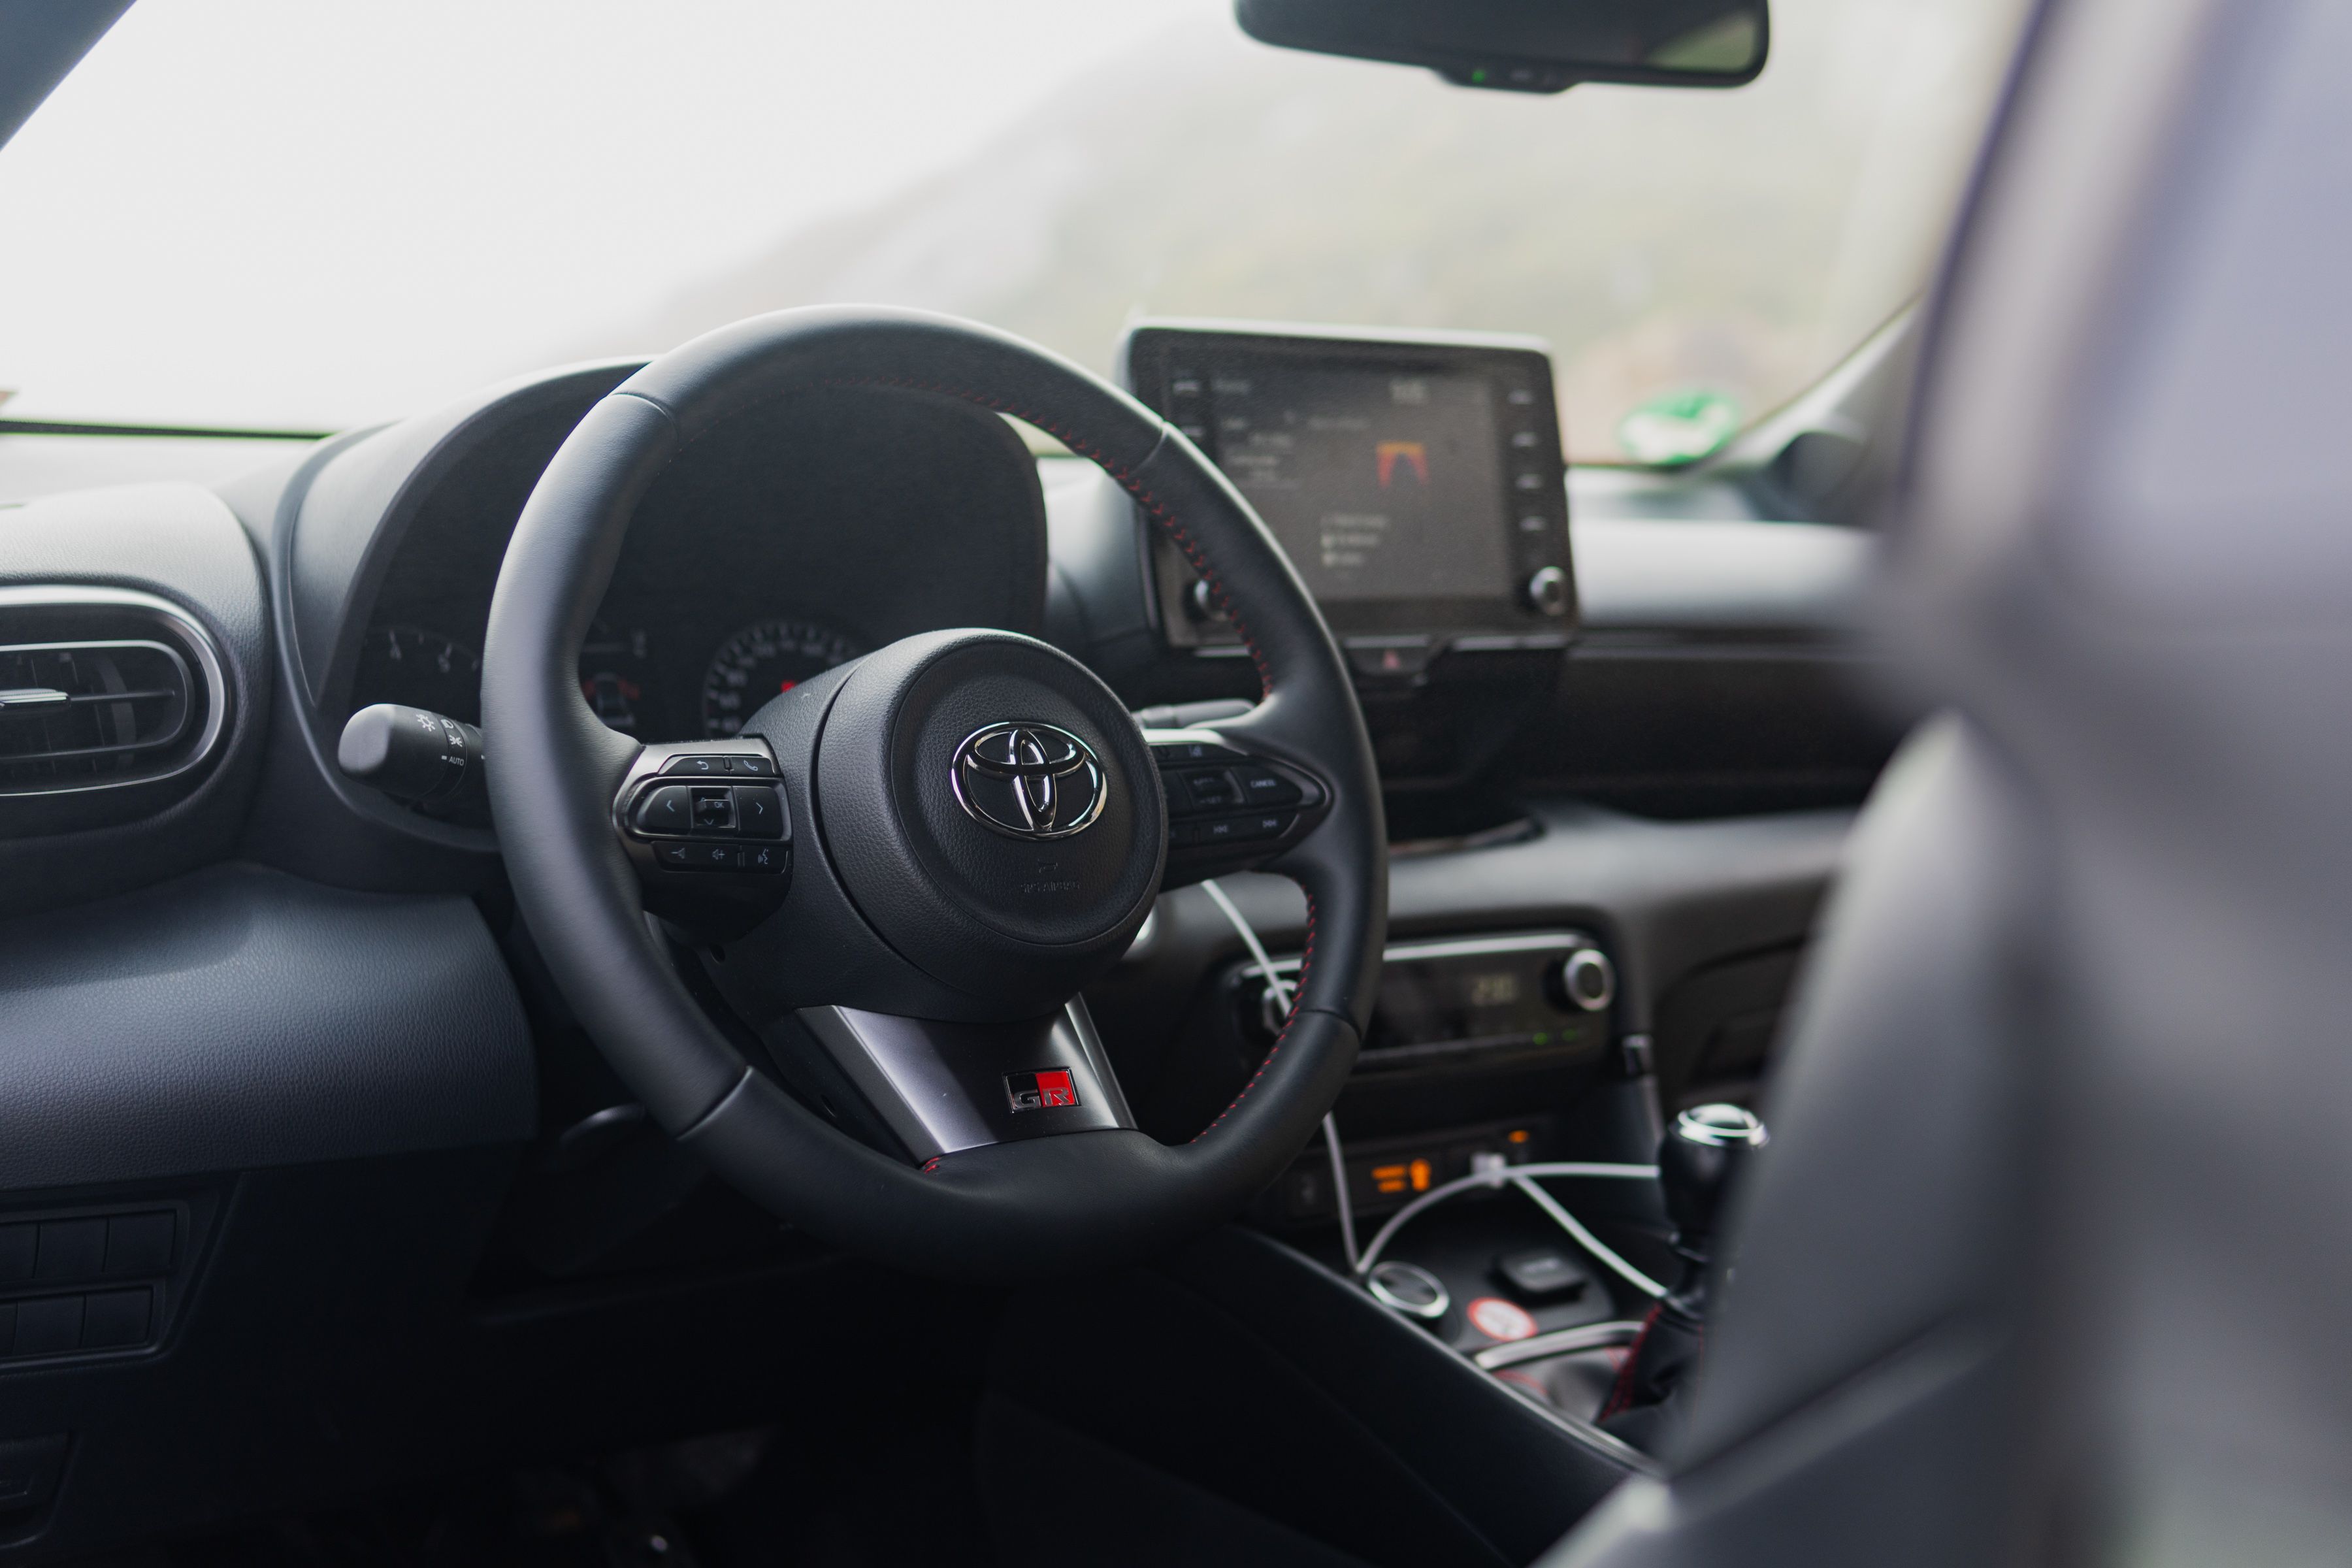 Driving the Toyota GR Yaris Was a Life-Changing Experience